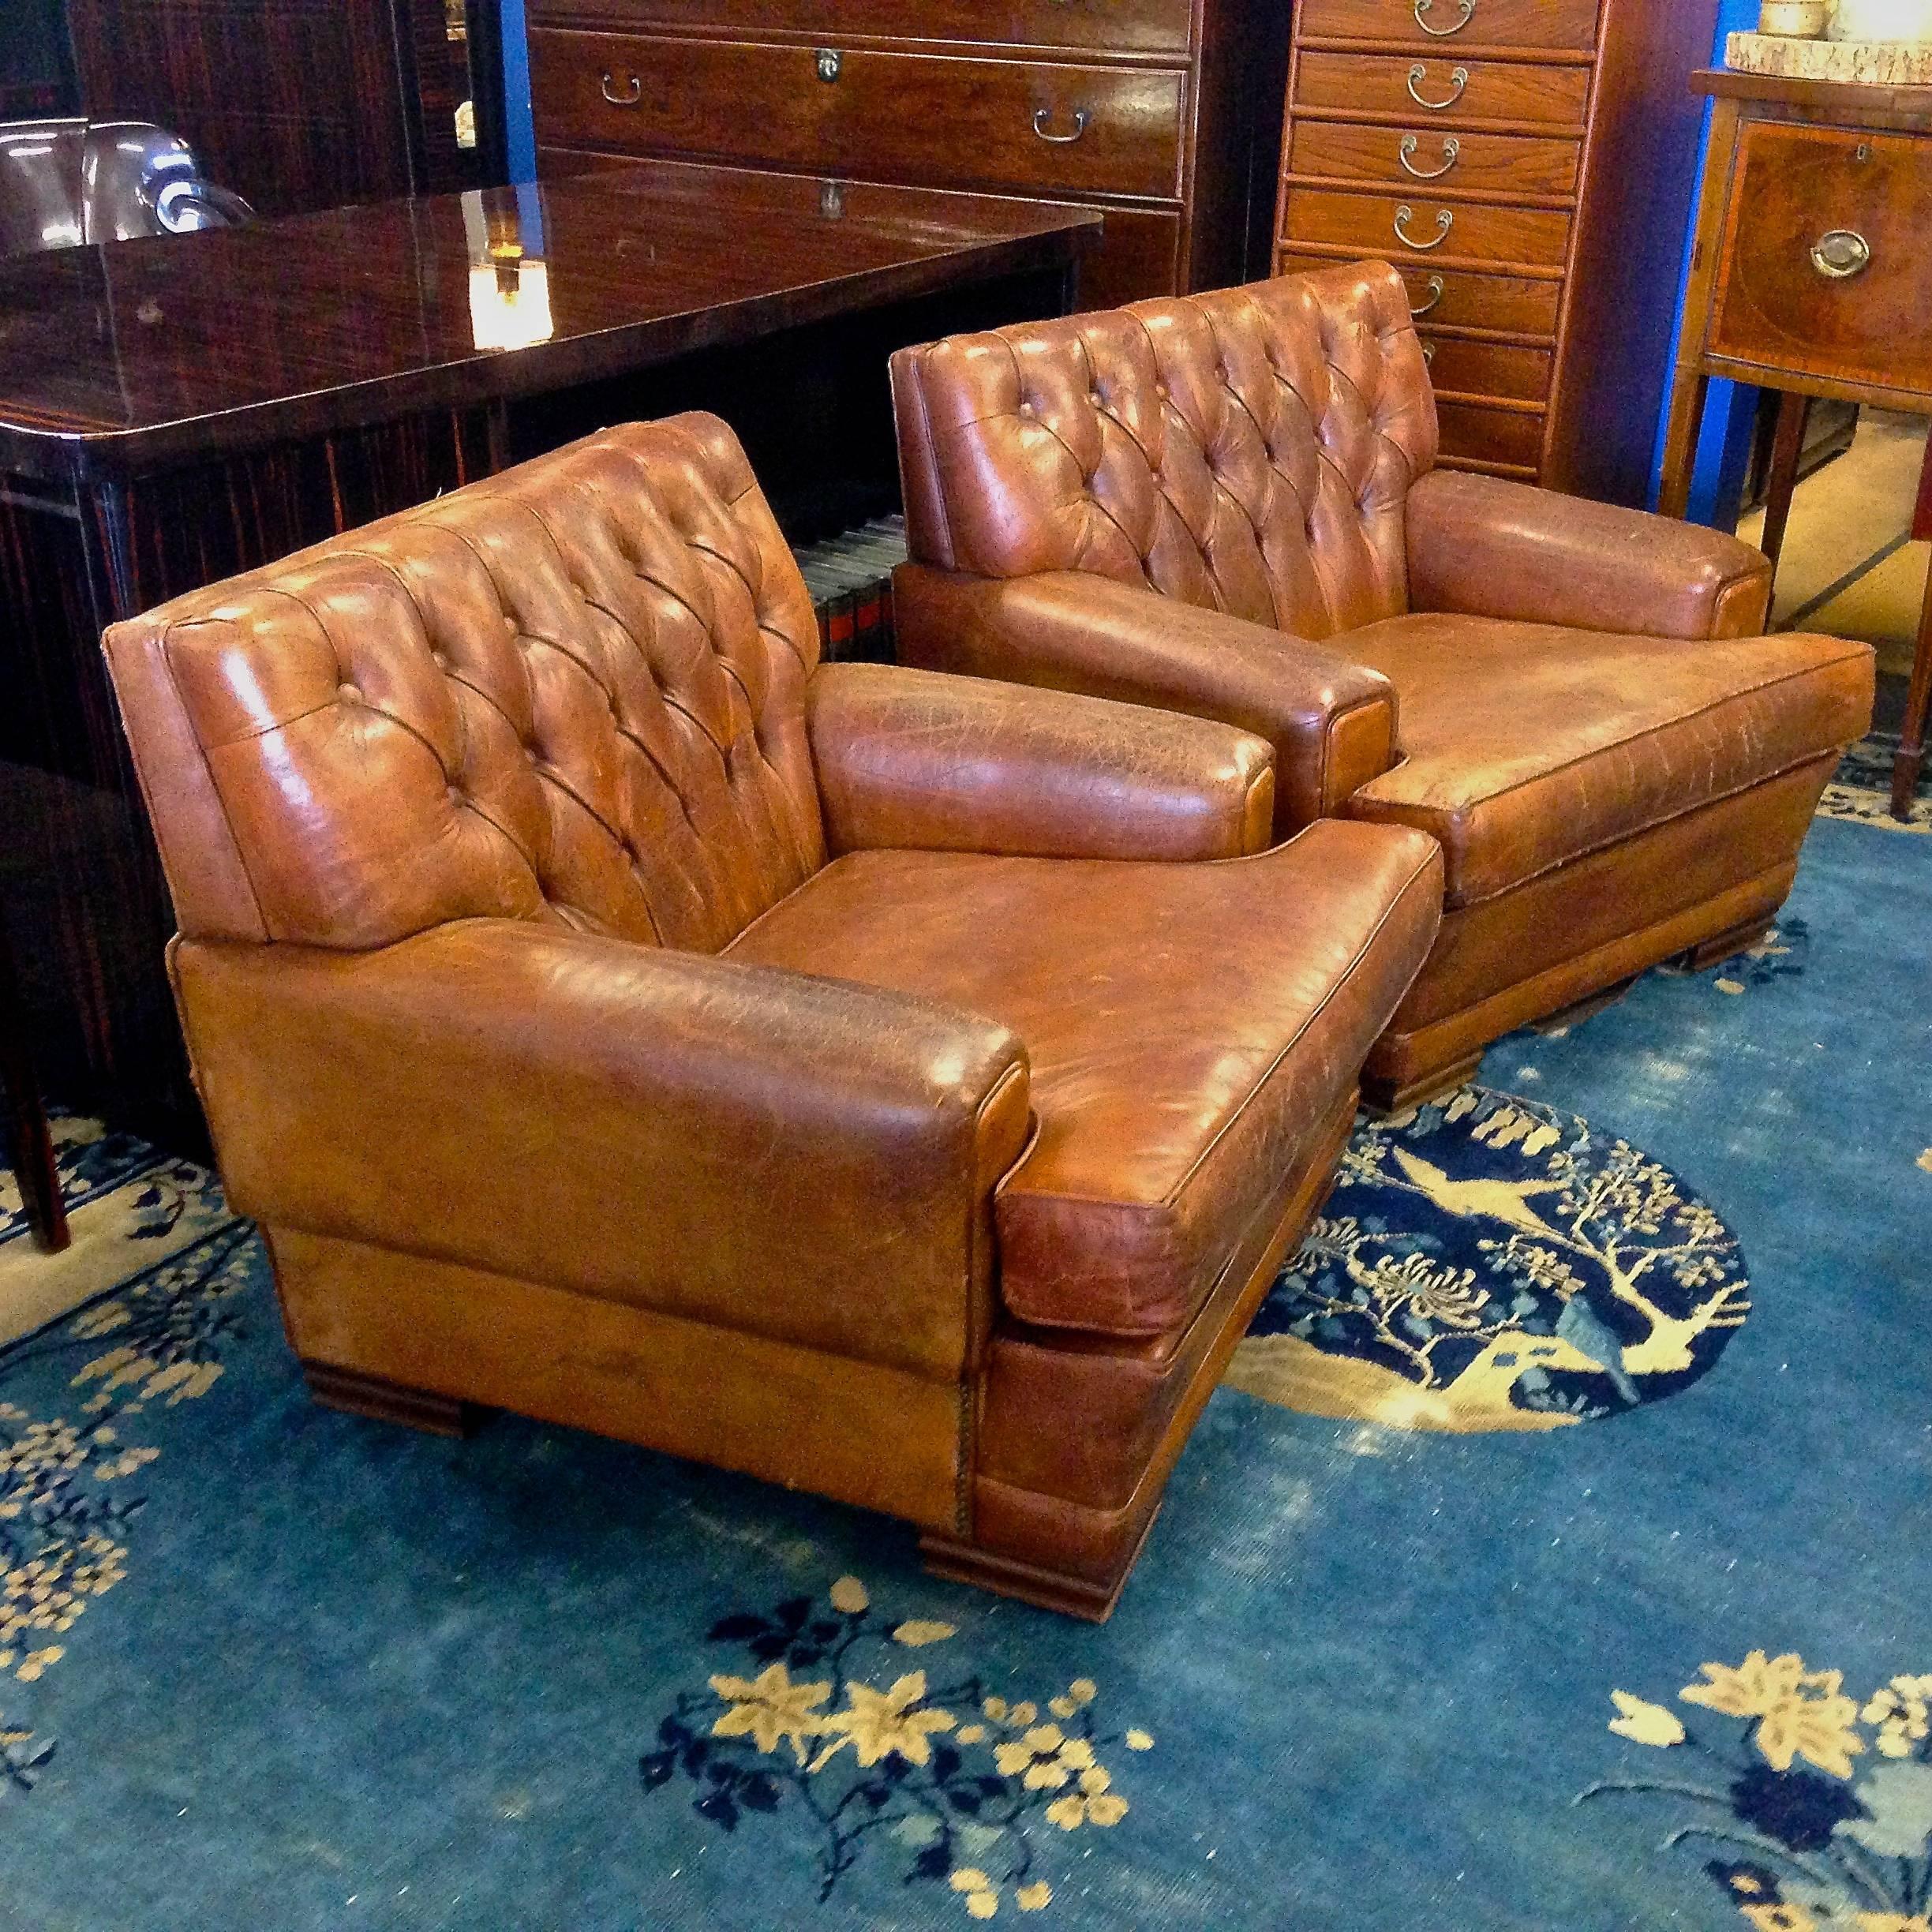 Pair of original 1920s French Art Deco button tufted leather club chairs. The original leather has become patinated and uniquely distressed with age. The chairs are in excellent sturdy physical condition. There are 18 button tufts on each chair.